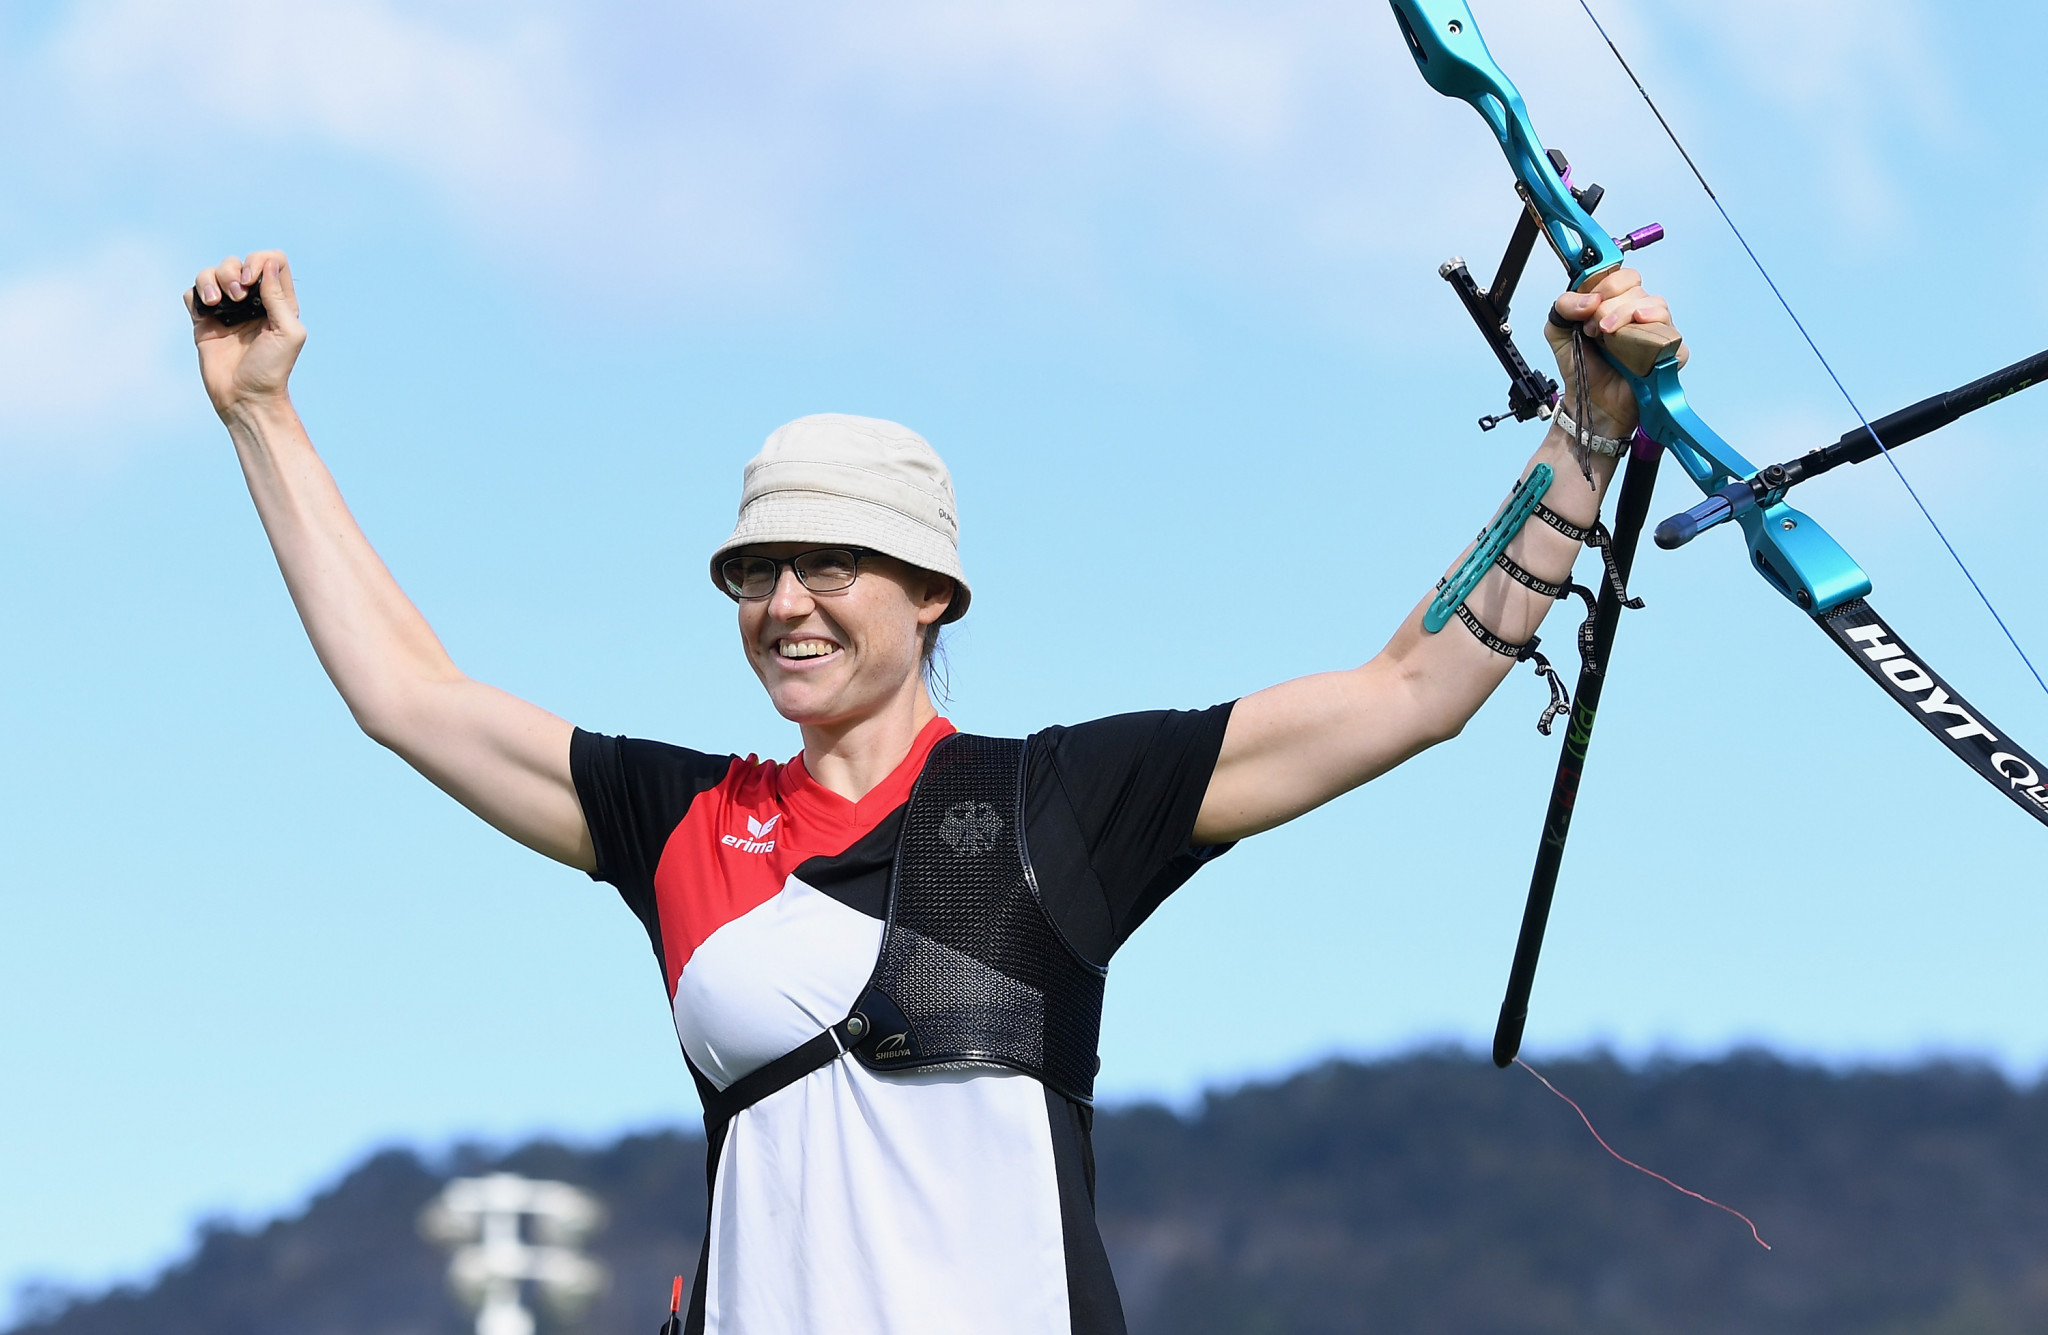 Olympic medallist Lisa Unruh is among those due to compete at the Sud de France Nimes Archery Tournament ©Getty Images